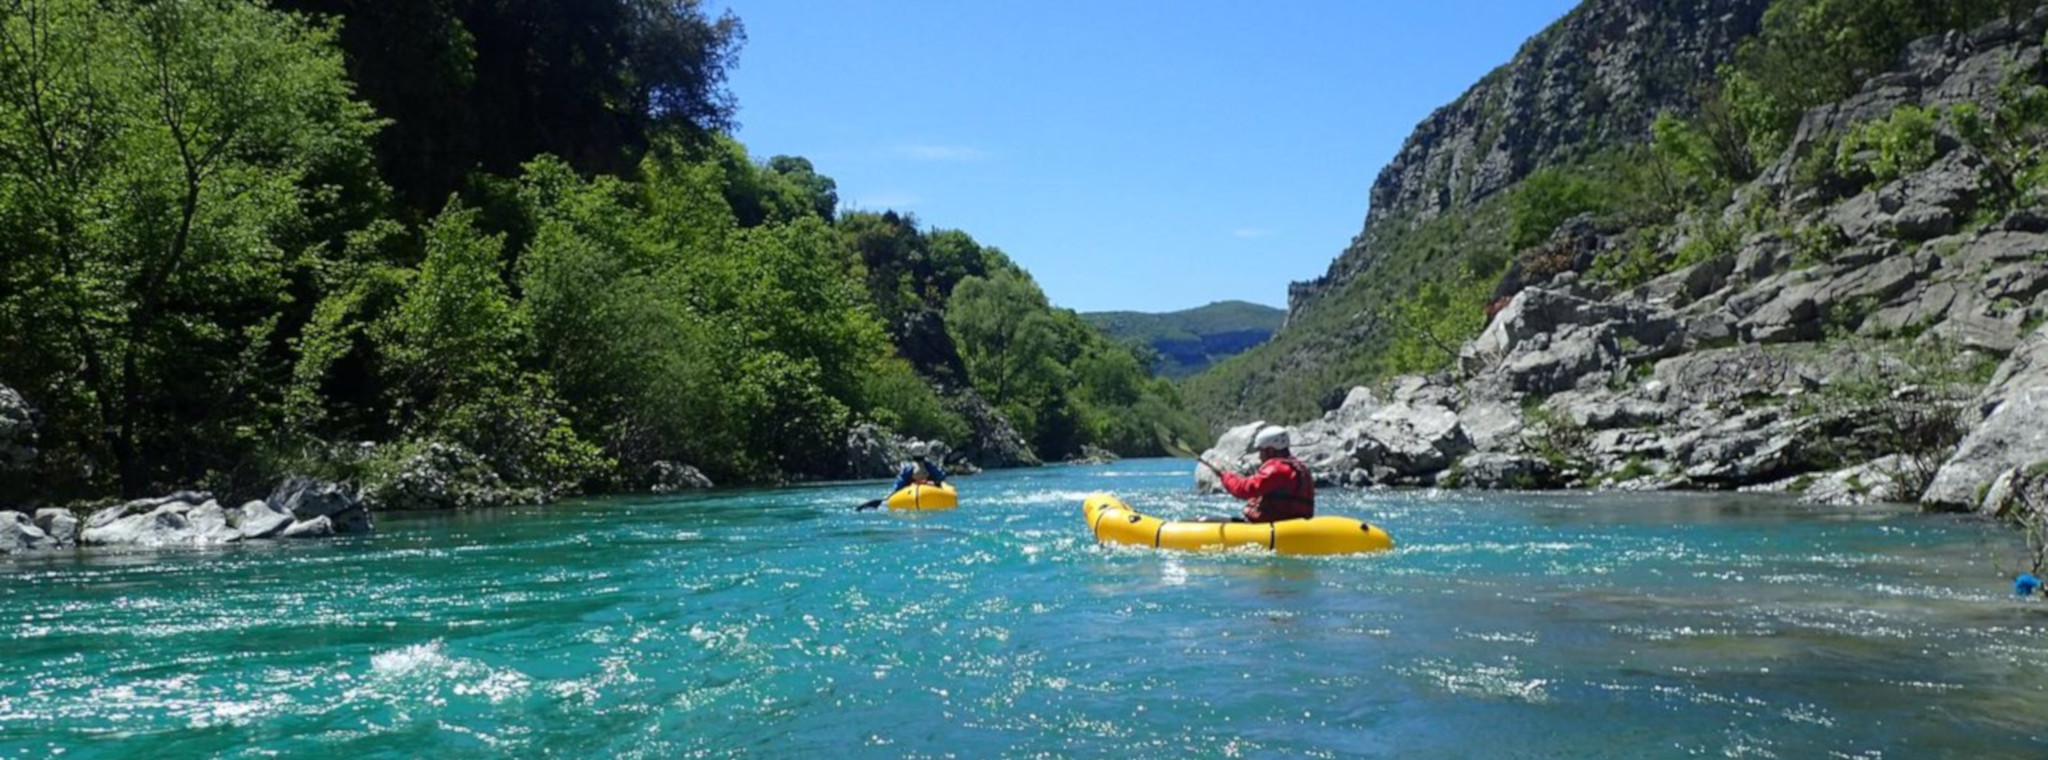 Packrafting Montenegro – a whitewater beginner’s course that won’t break the bank